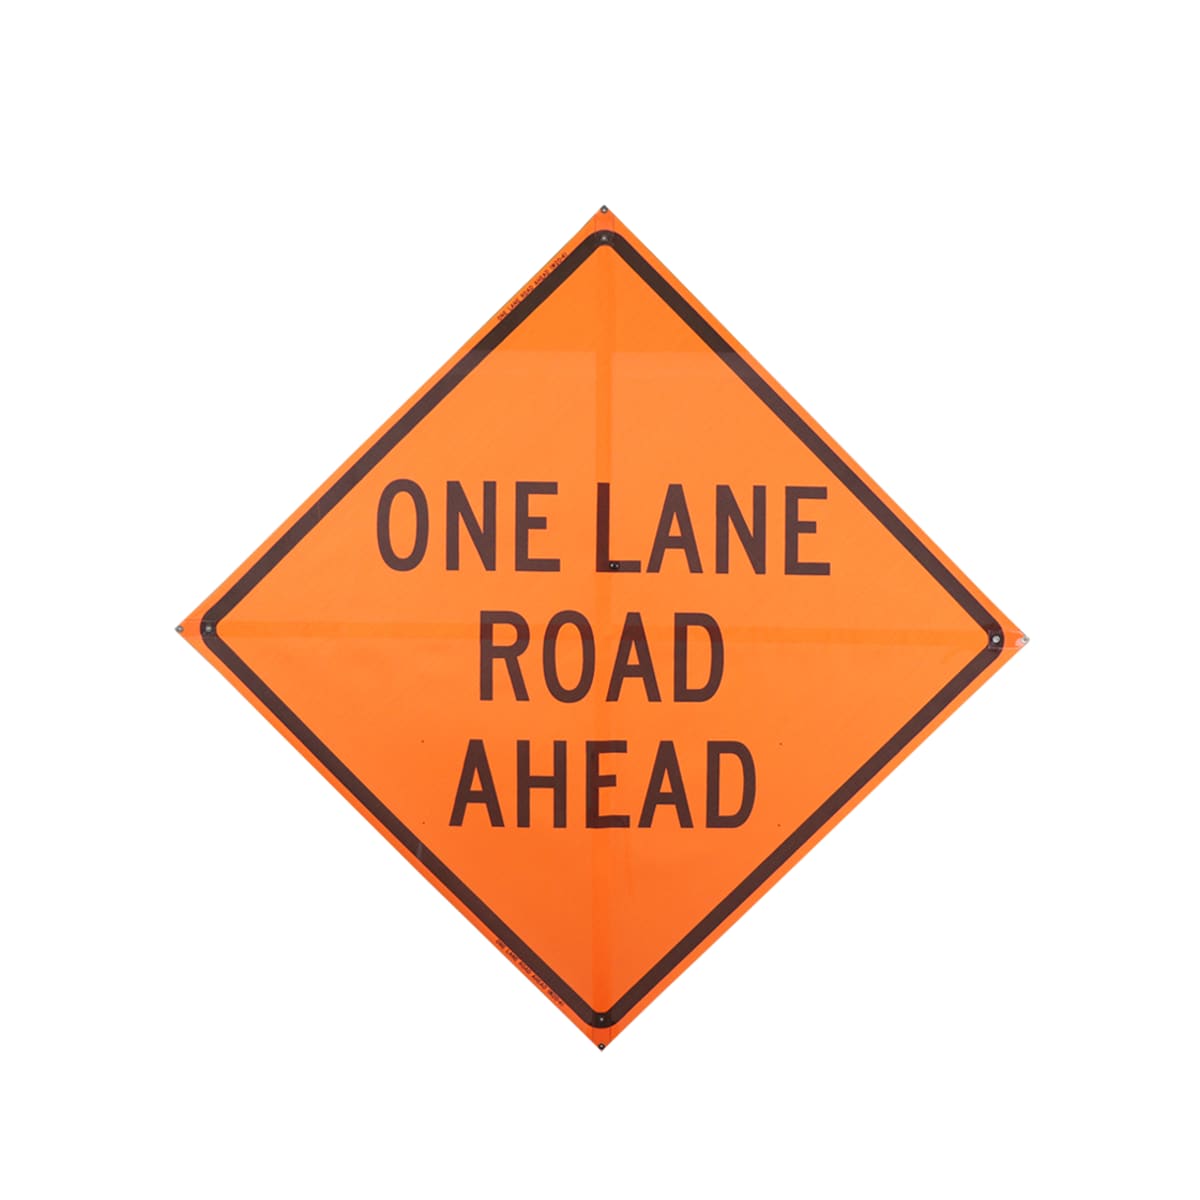 One Lane Road Ahead 48 X 48 Mesh Roll Up Construction Signs W 4 Traffic Safety Store